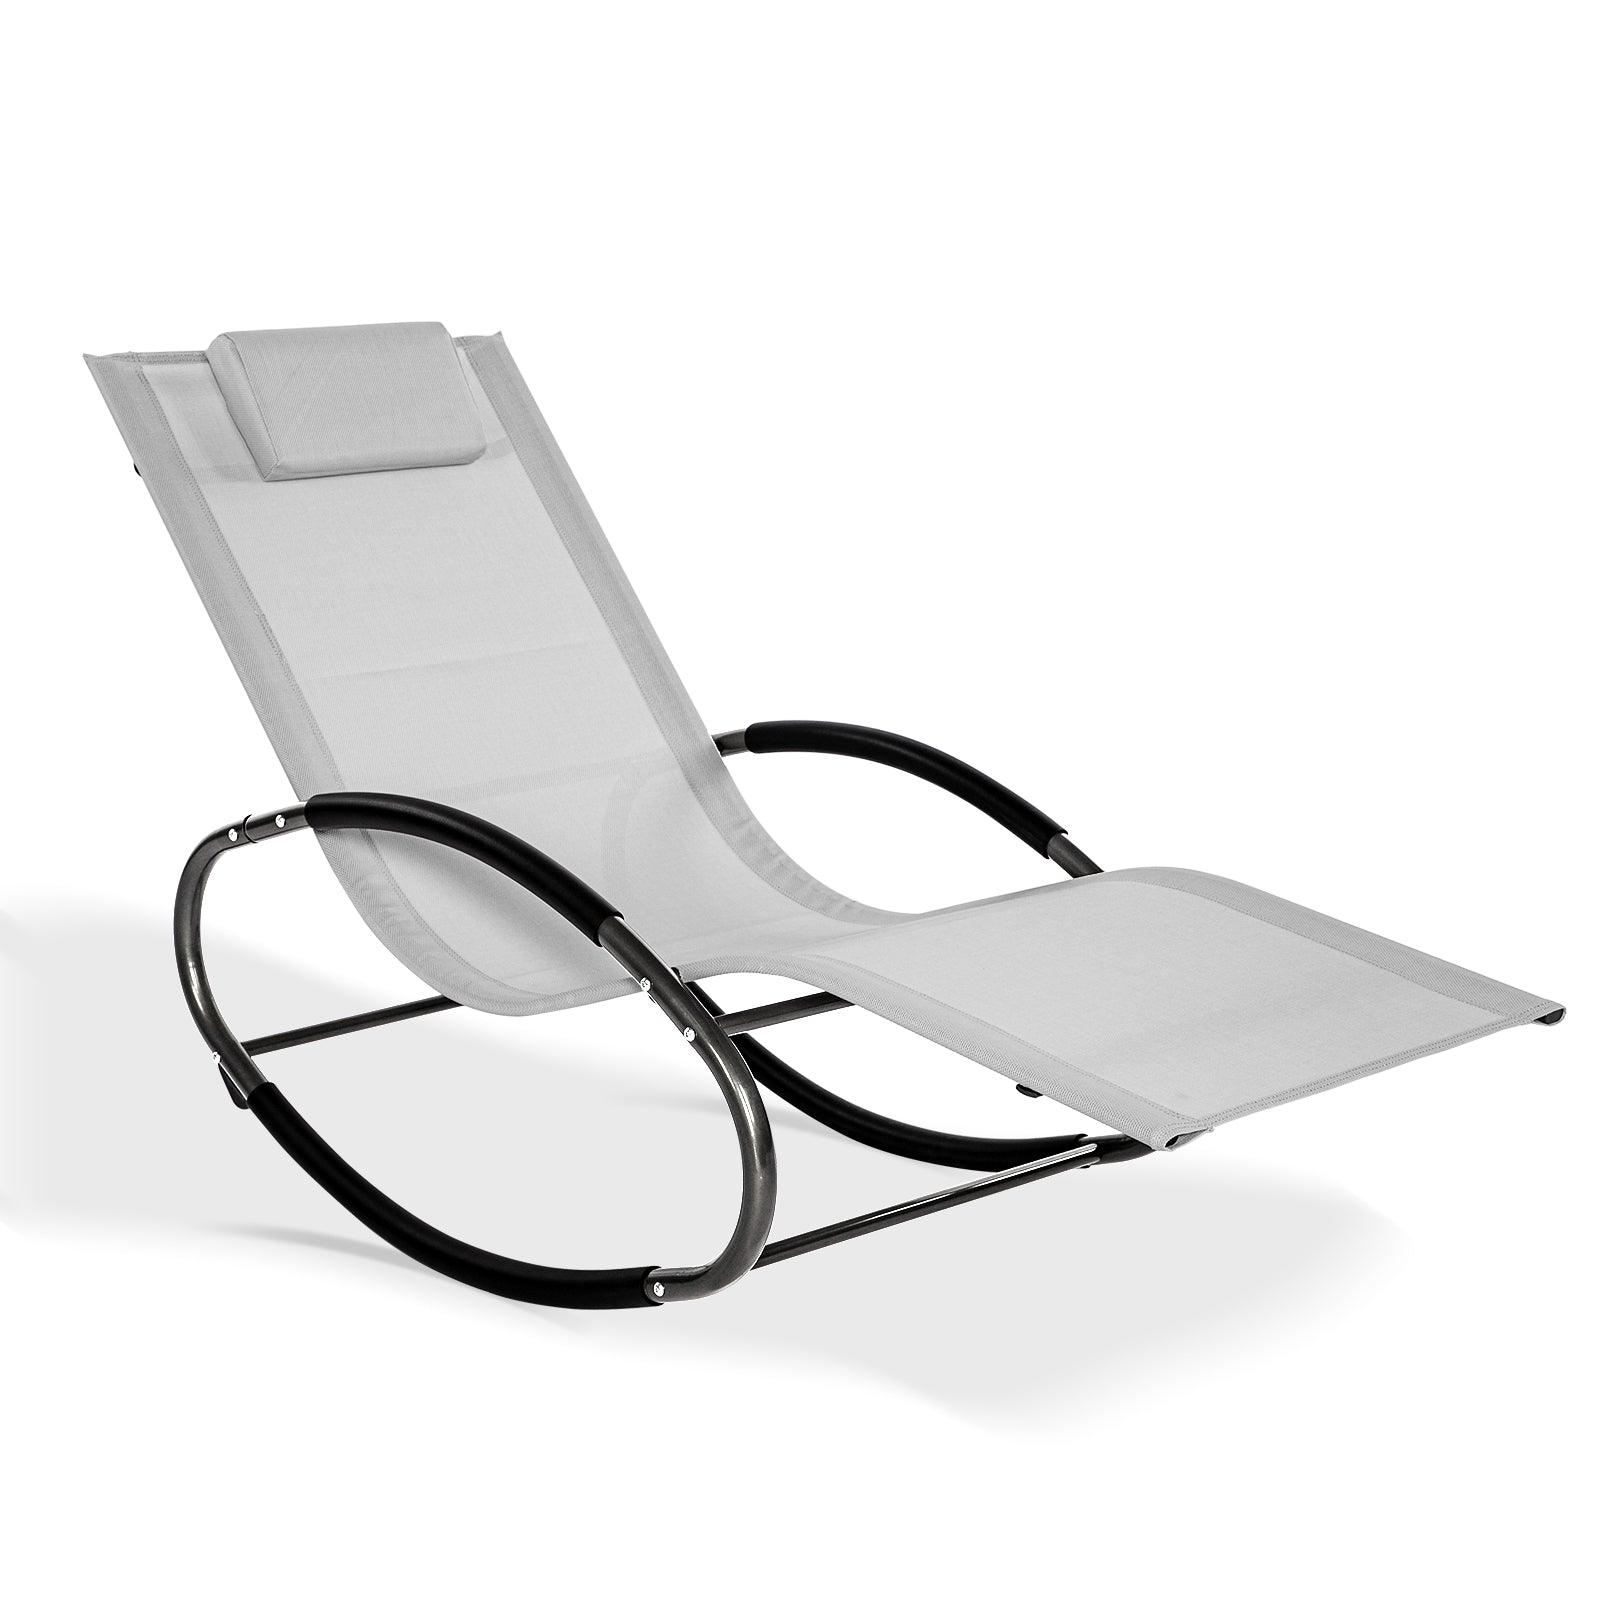 Outdoor Rocking Chair / Lounger / Recliner for Garden, Patio, Decking, Balcony - Charming Spaces